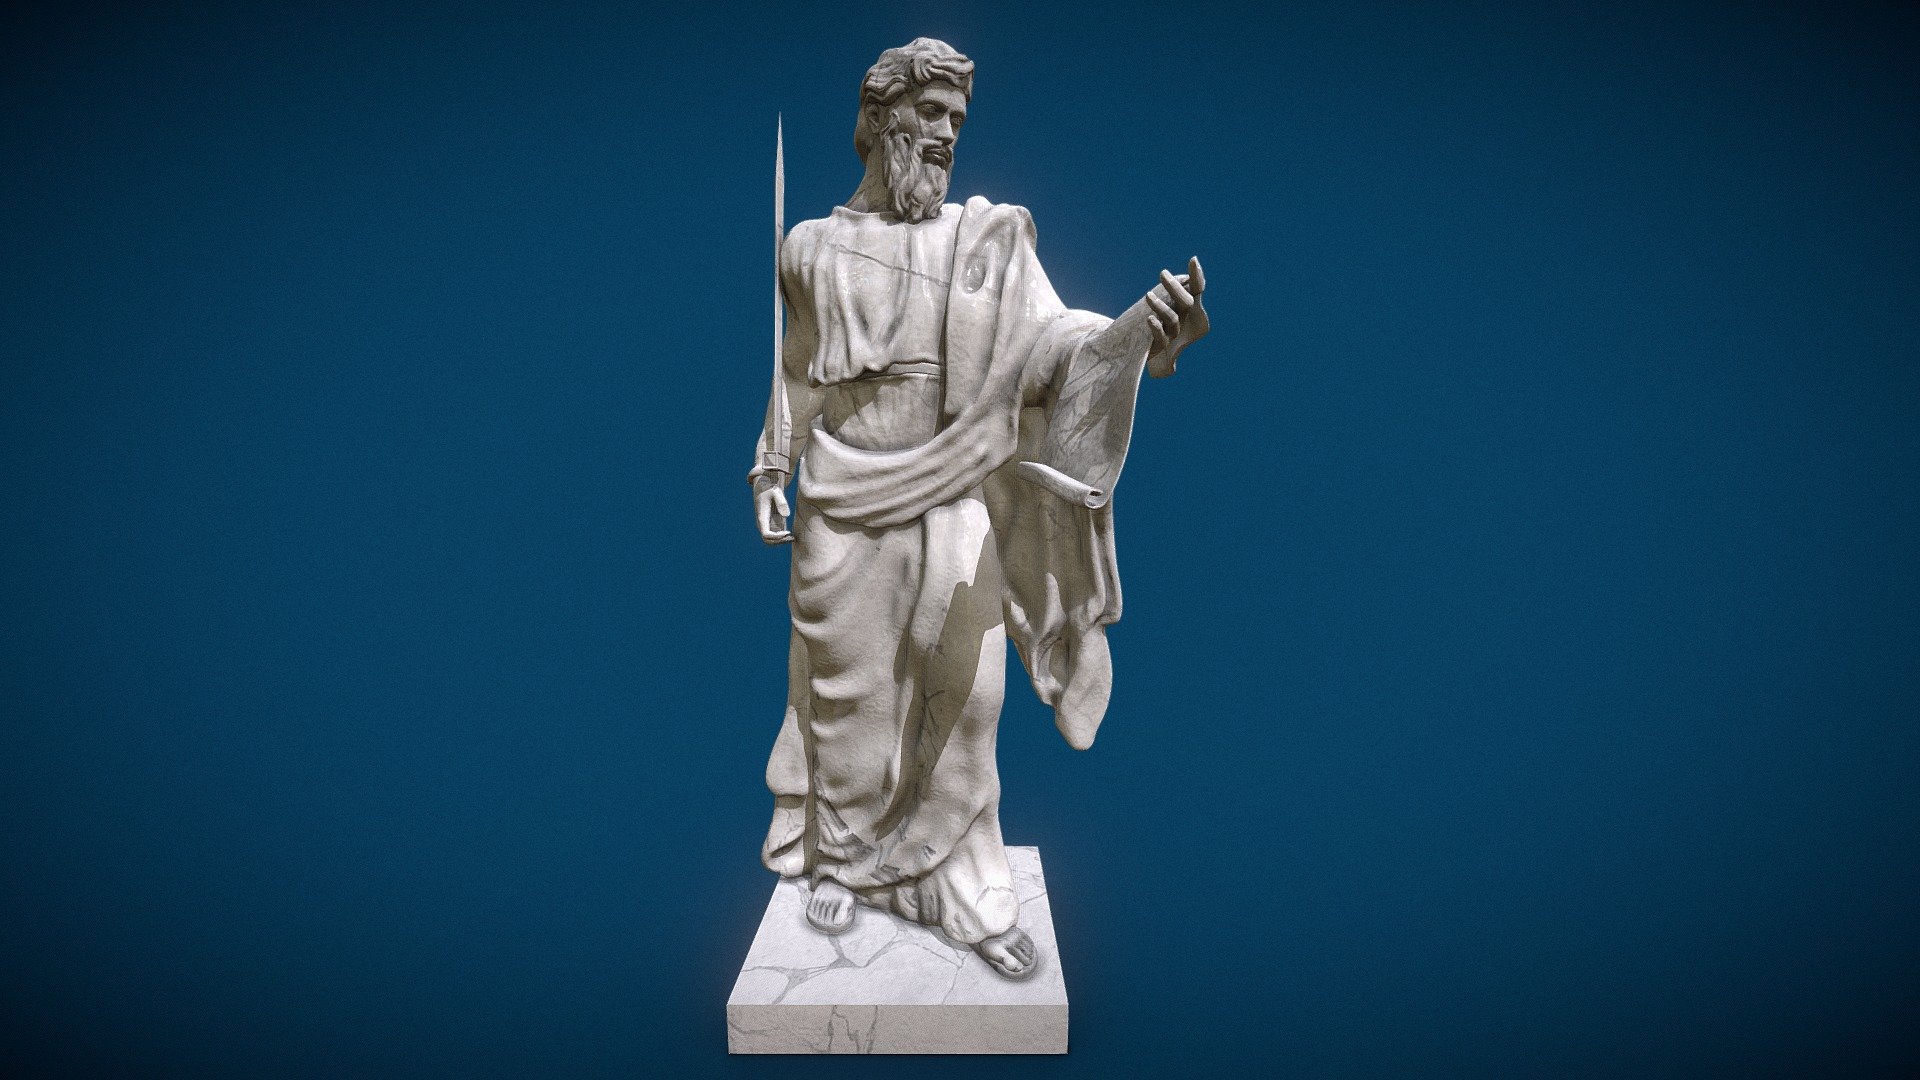 Ready for 3D print.
Ideal for videogame or rendering

&ldquo;The statue of St Paul was sculpted in 1838 by Adamo Tadolini (b. Bologna 1788, d. Rome 1868). He had studied in Bologna under the direction of De Maria; in 1813 he came to Rome, like De Fabris, and came to the attention of Canova, the greatest sculptor of the period, who took him into his studio.

The statue of St. Paul is 5.55m in height, on a pedestal 4.91m high. It was restored in 1985-86 through the generosity of the Order of the Knights of Columbus.